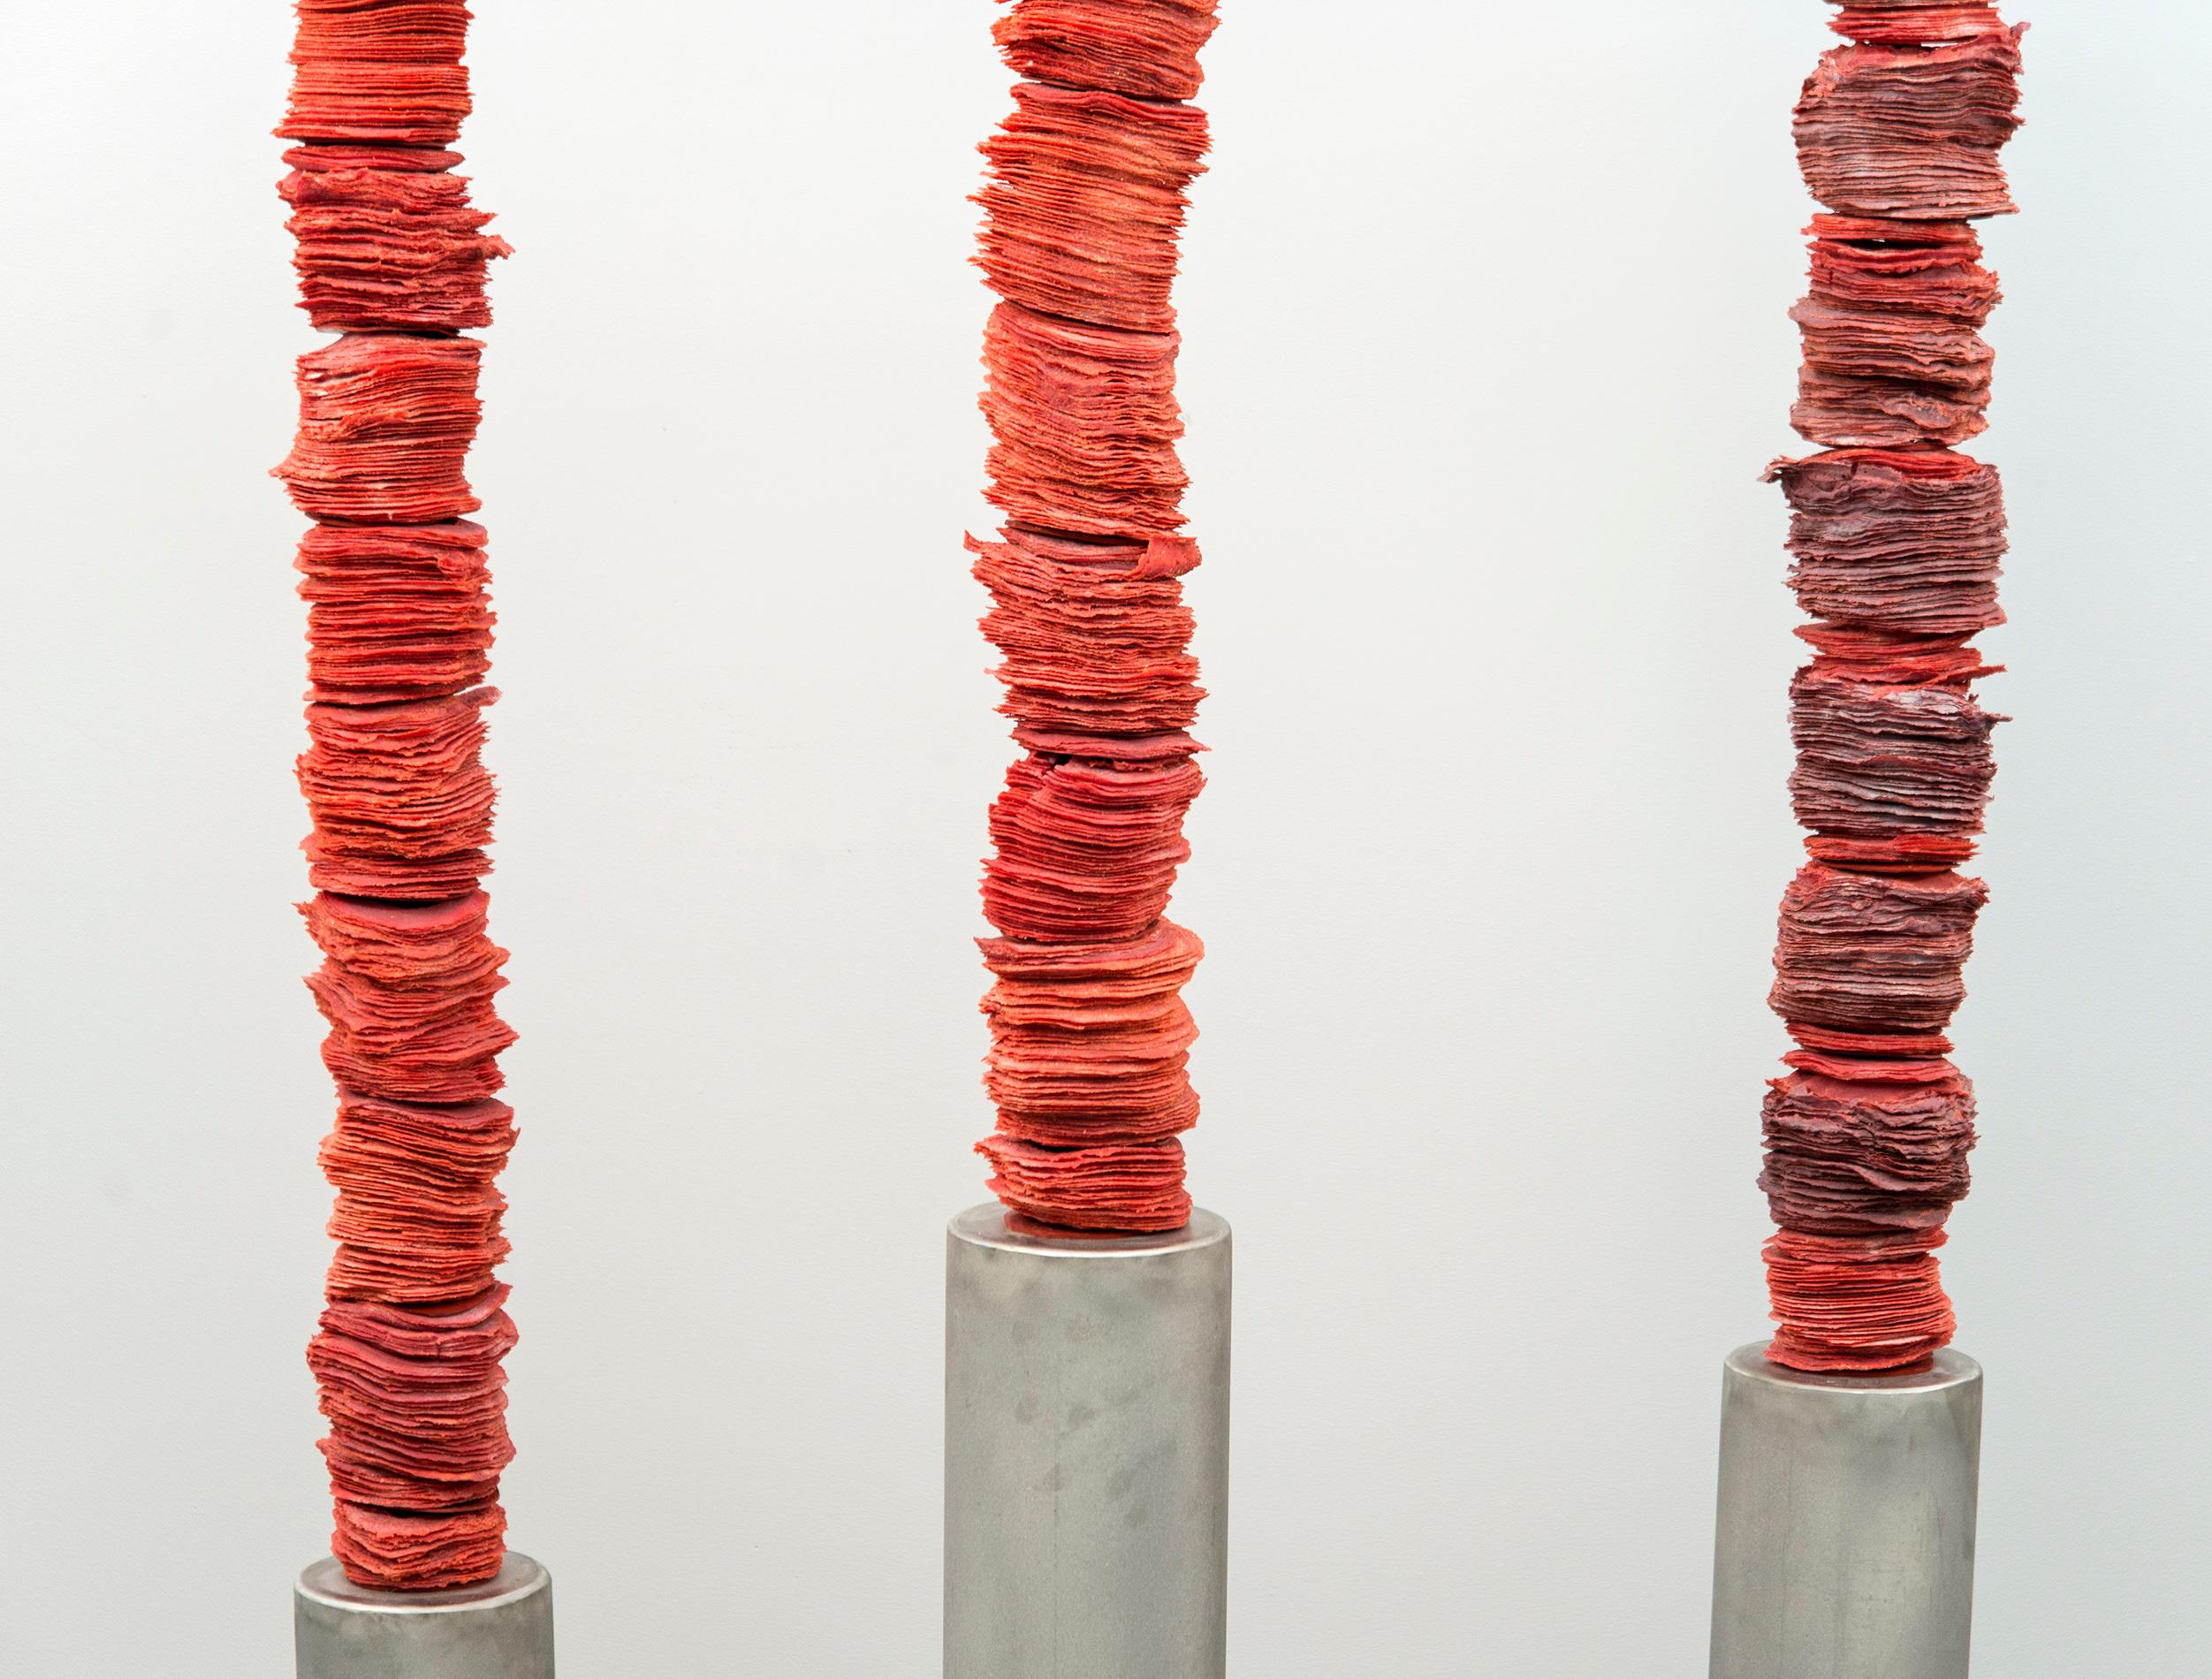 Rising Trio - tall, dynamic, textured, red, glass columns sculpture - Sculpture by Cheryl Wilson Smith